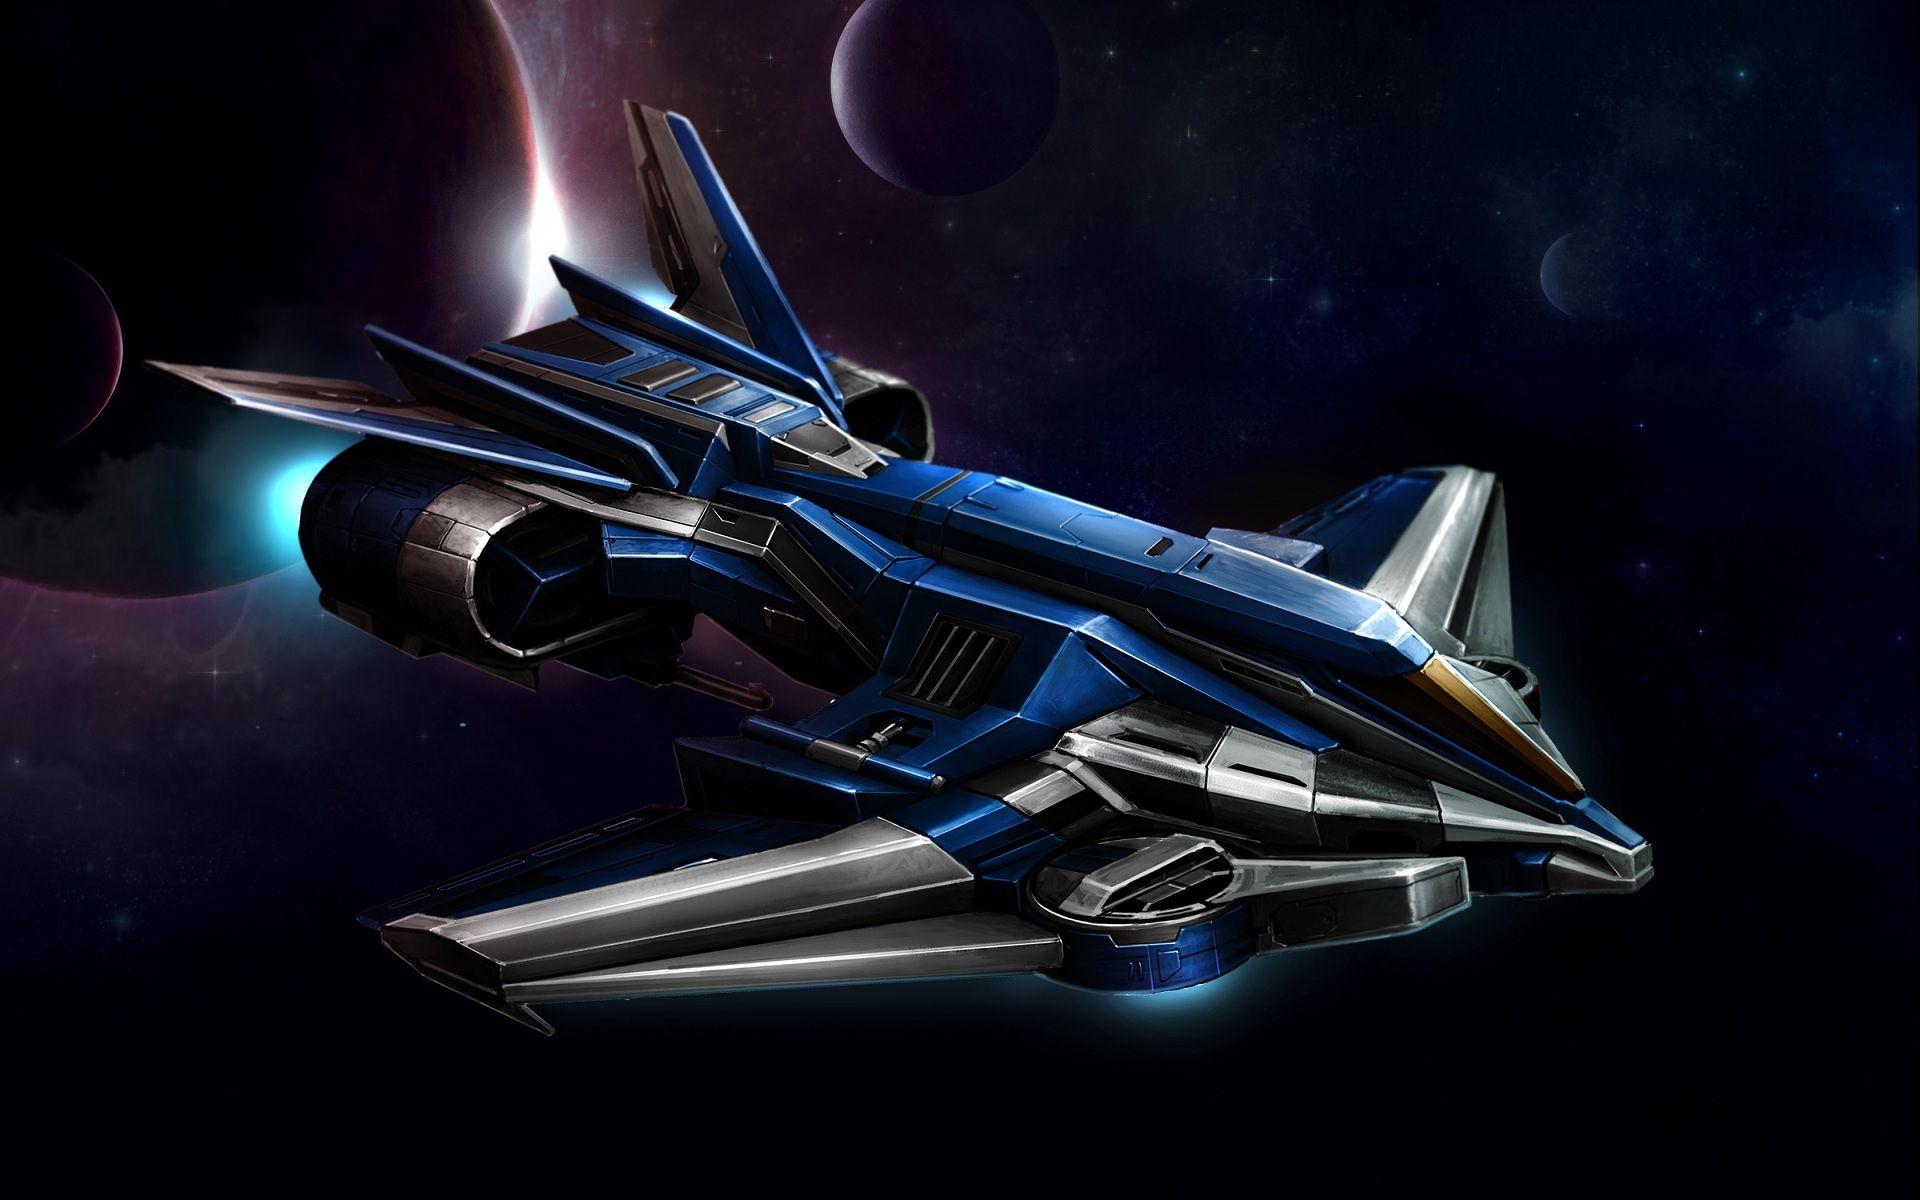 Black themed spaceship conceptual artwork and wallpaper